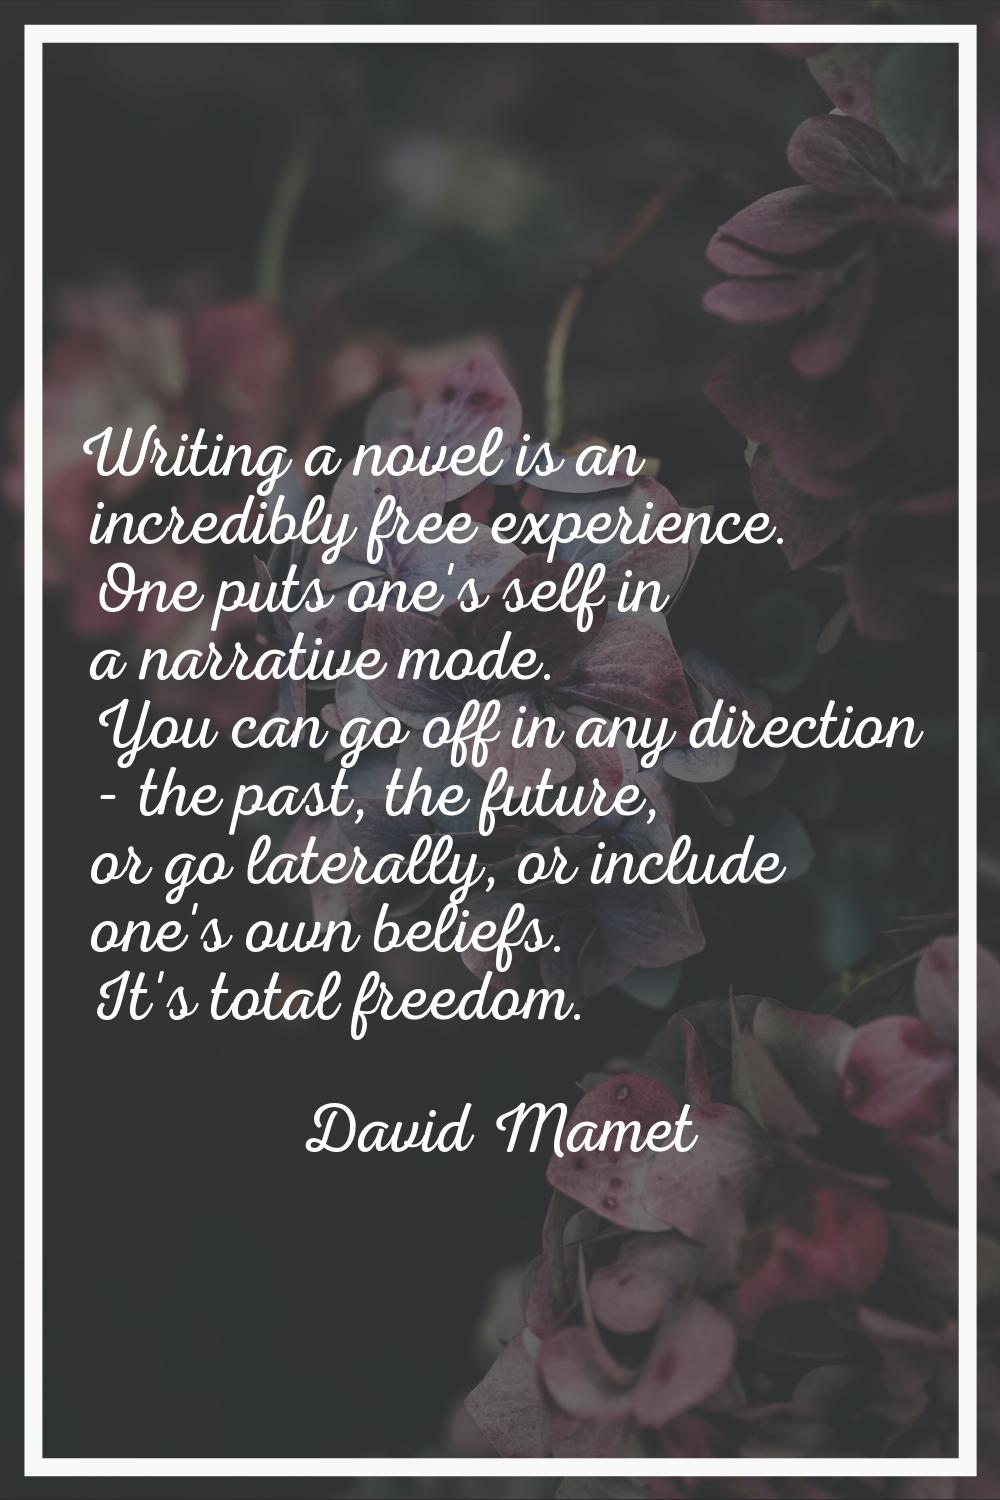 Writing a novel is an incredibly free experience. One puts one's self in a narrative mode. You can 